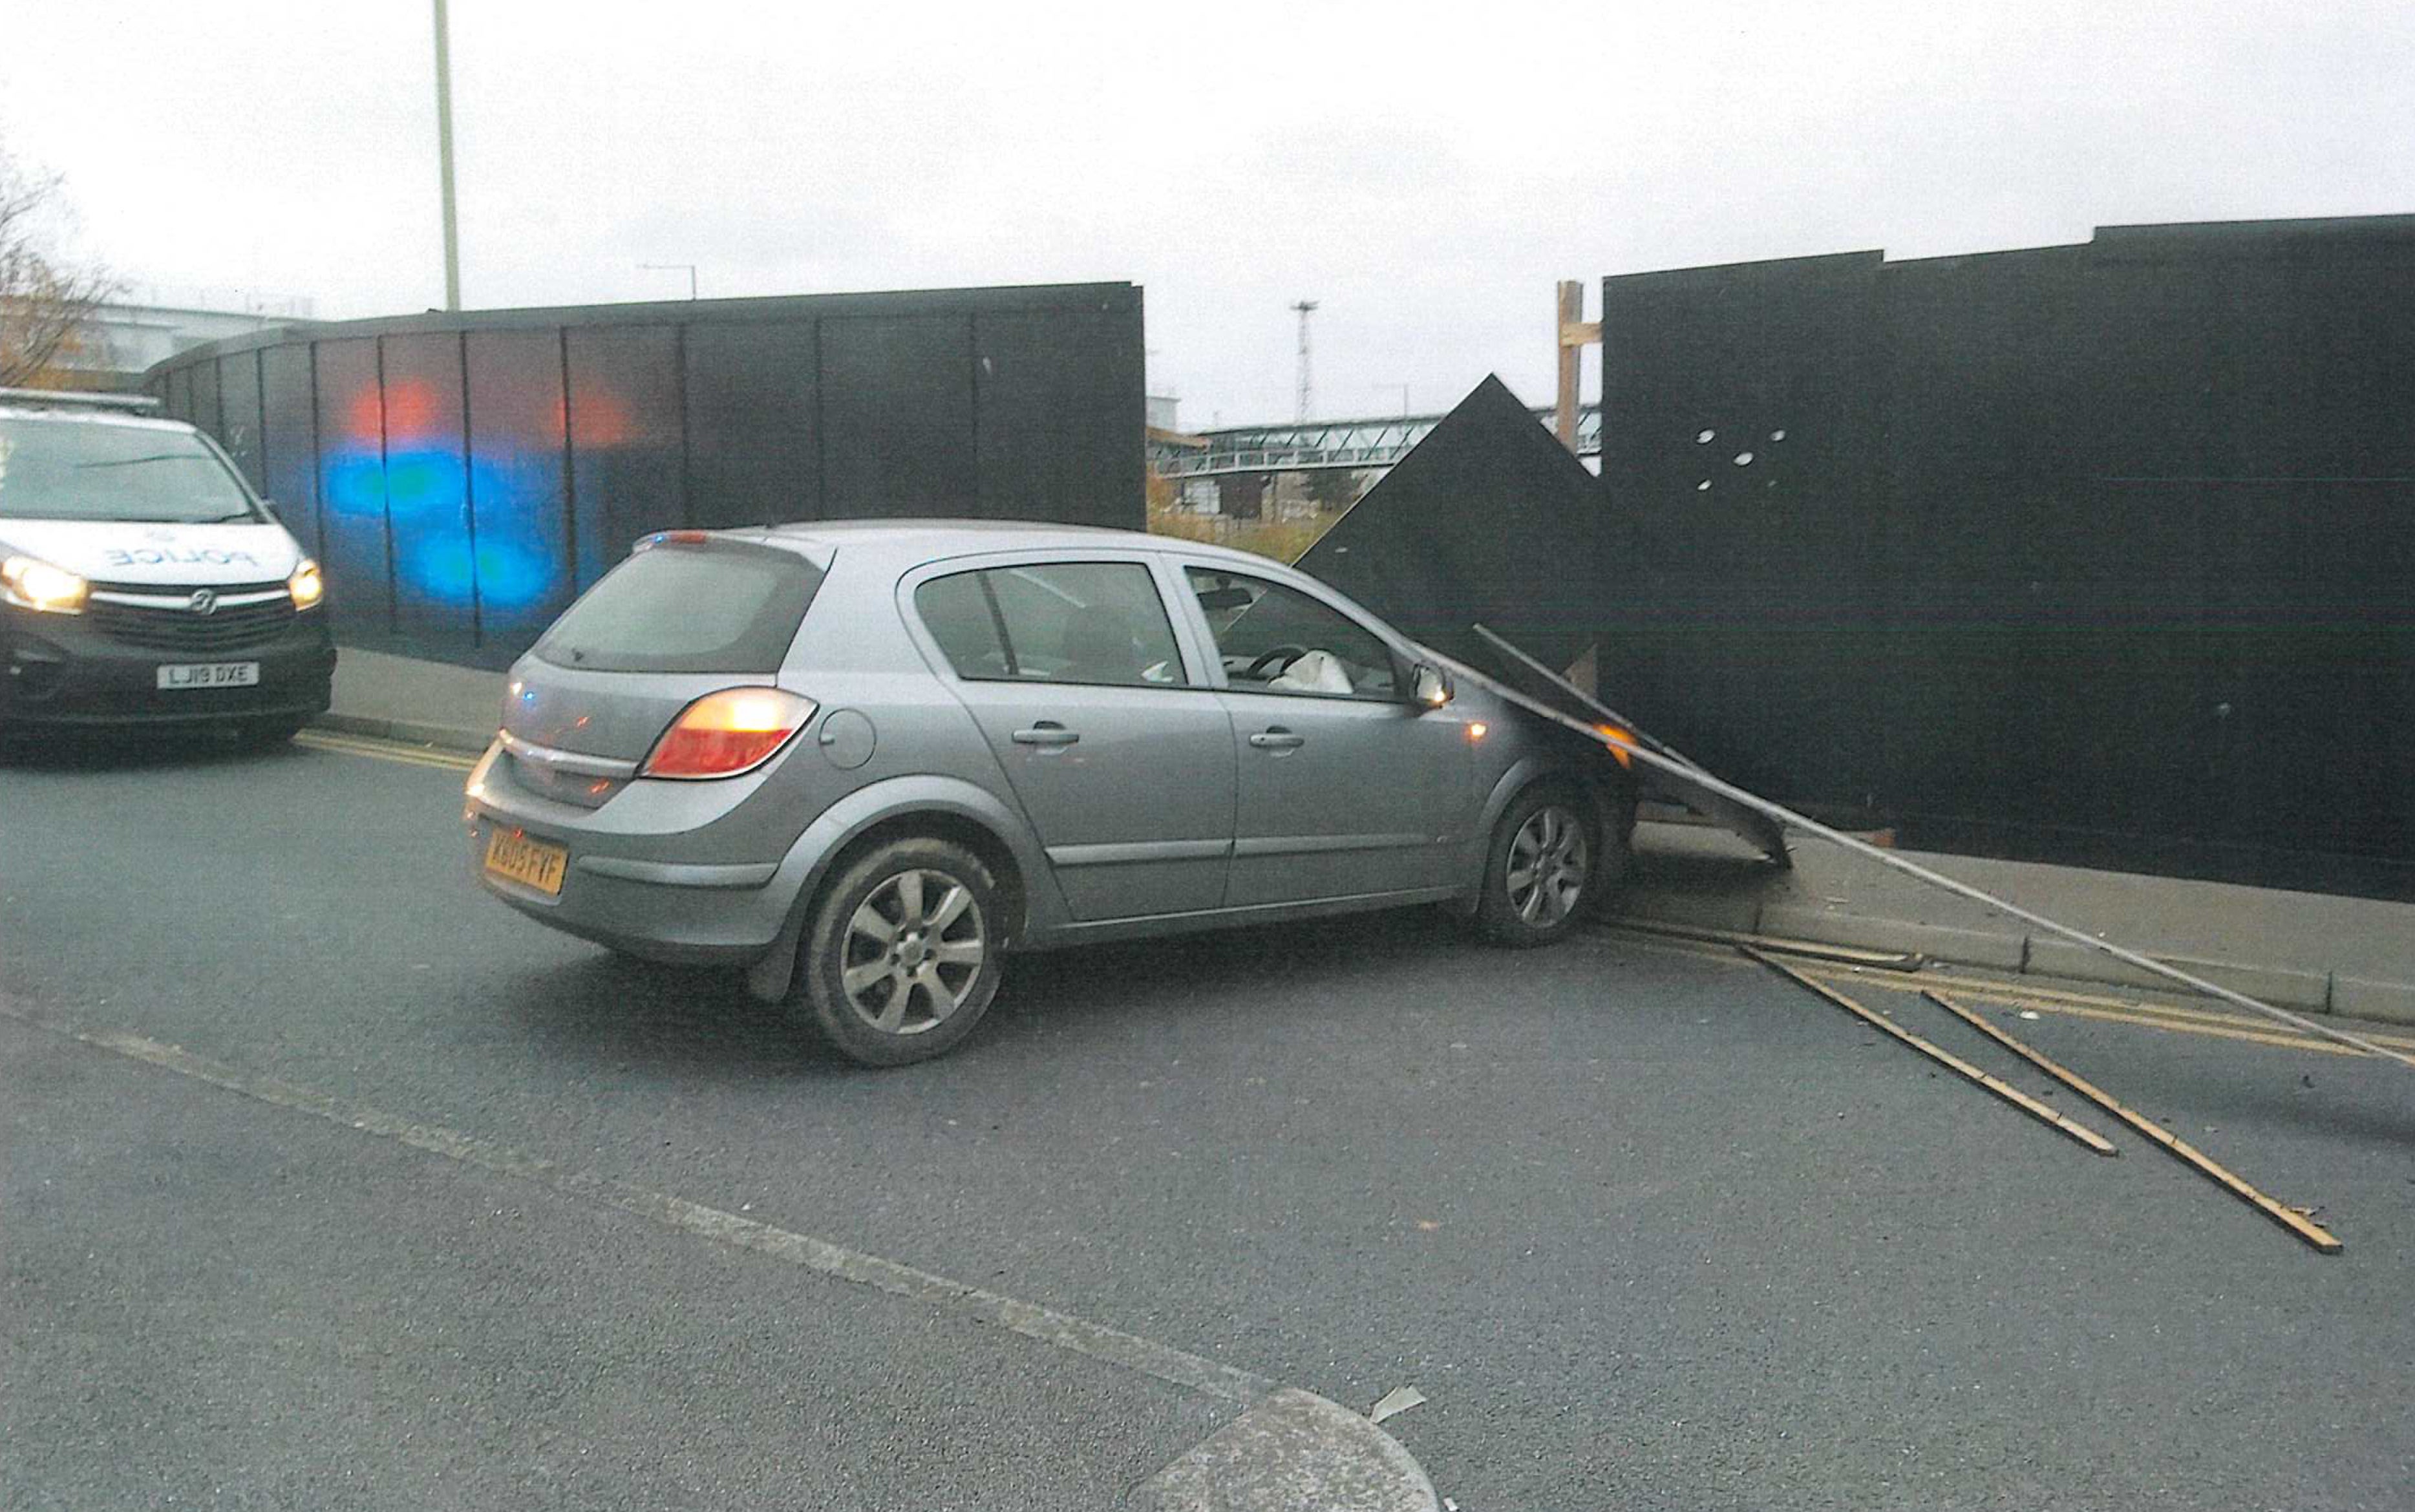 The car crashed into a fence, narrowly missing a family (CPS/PA)